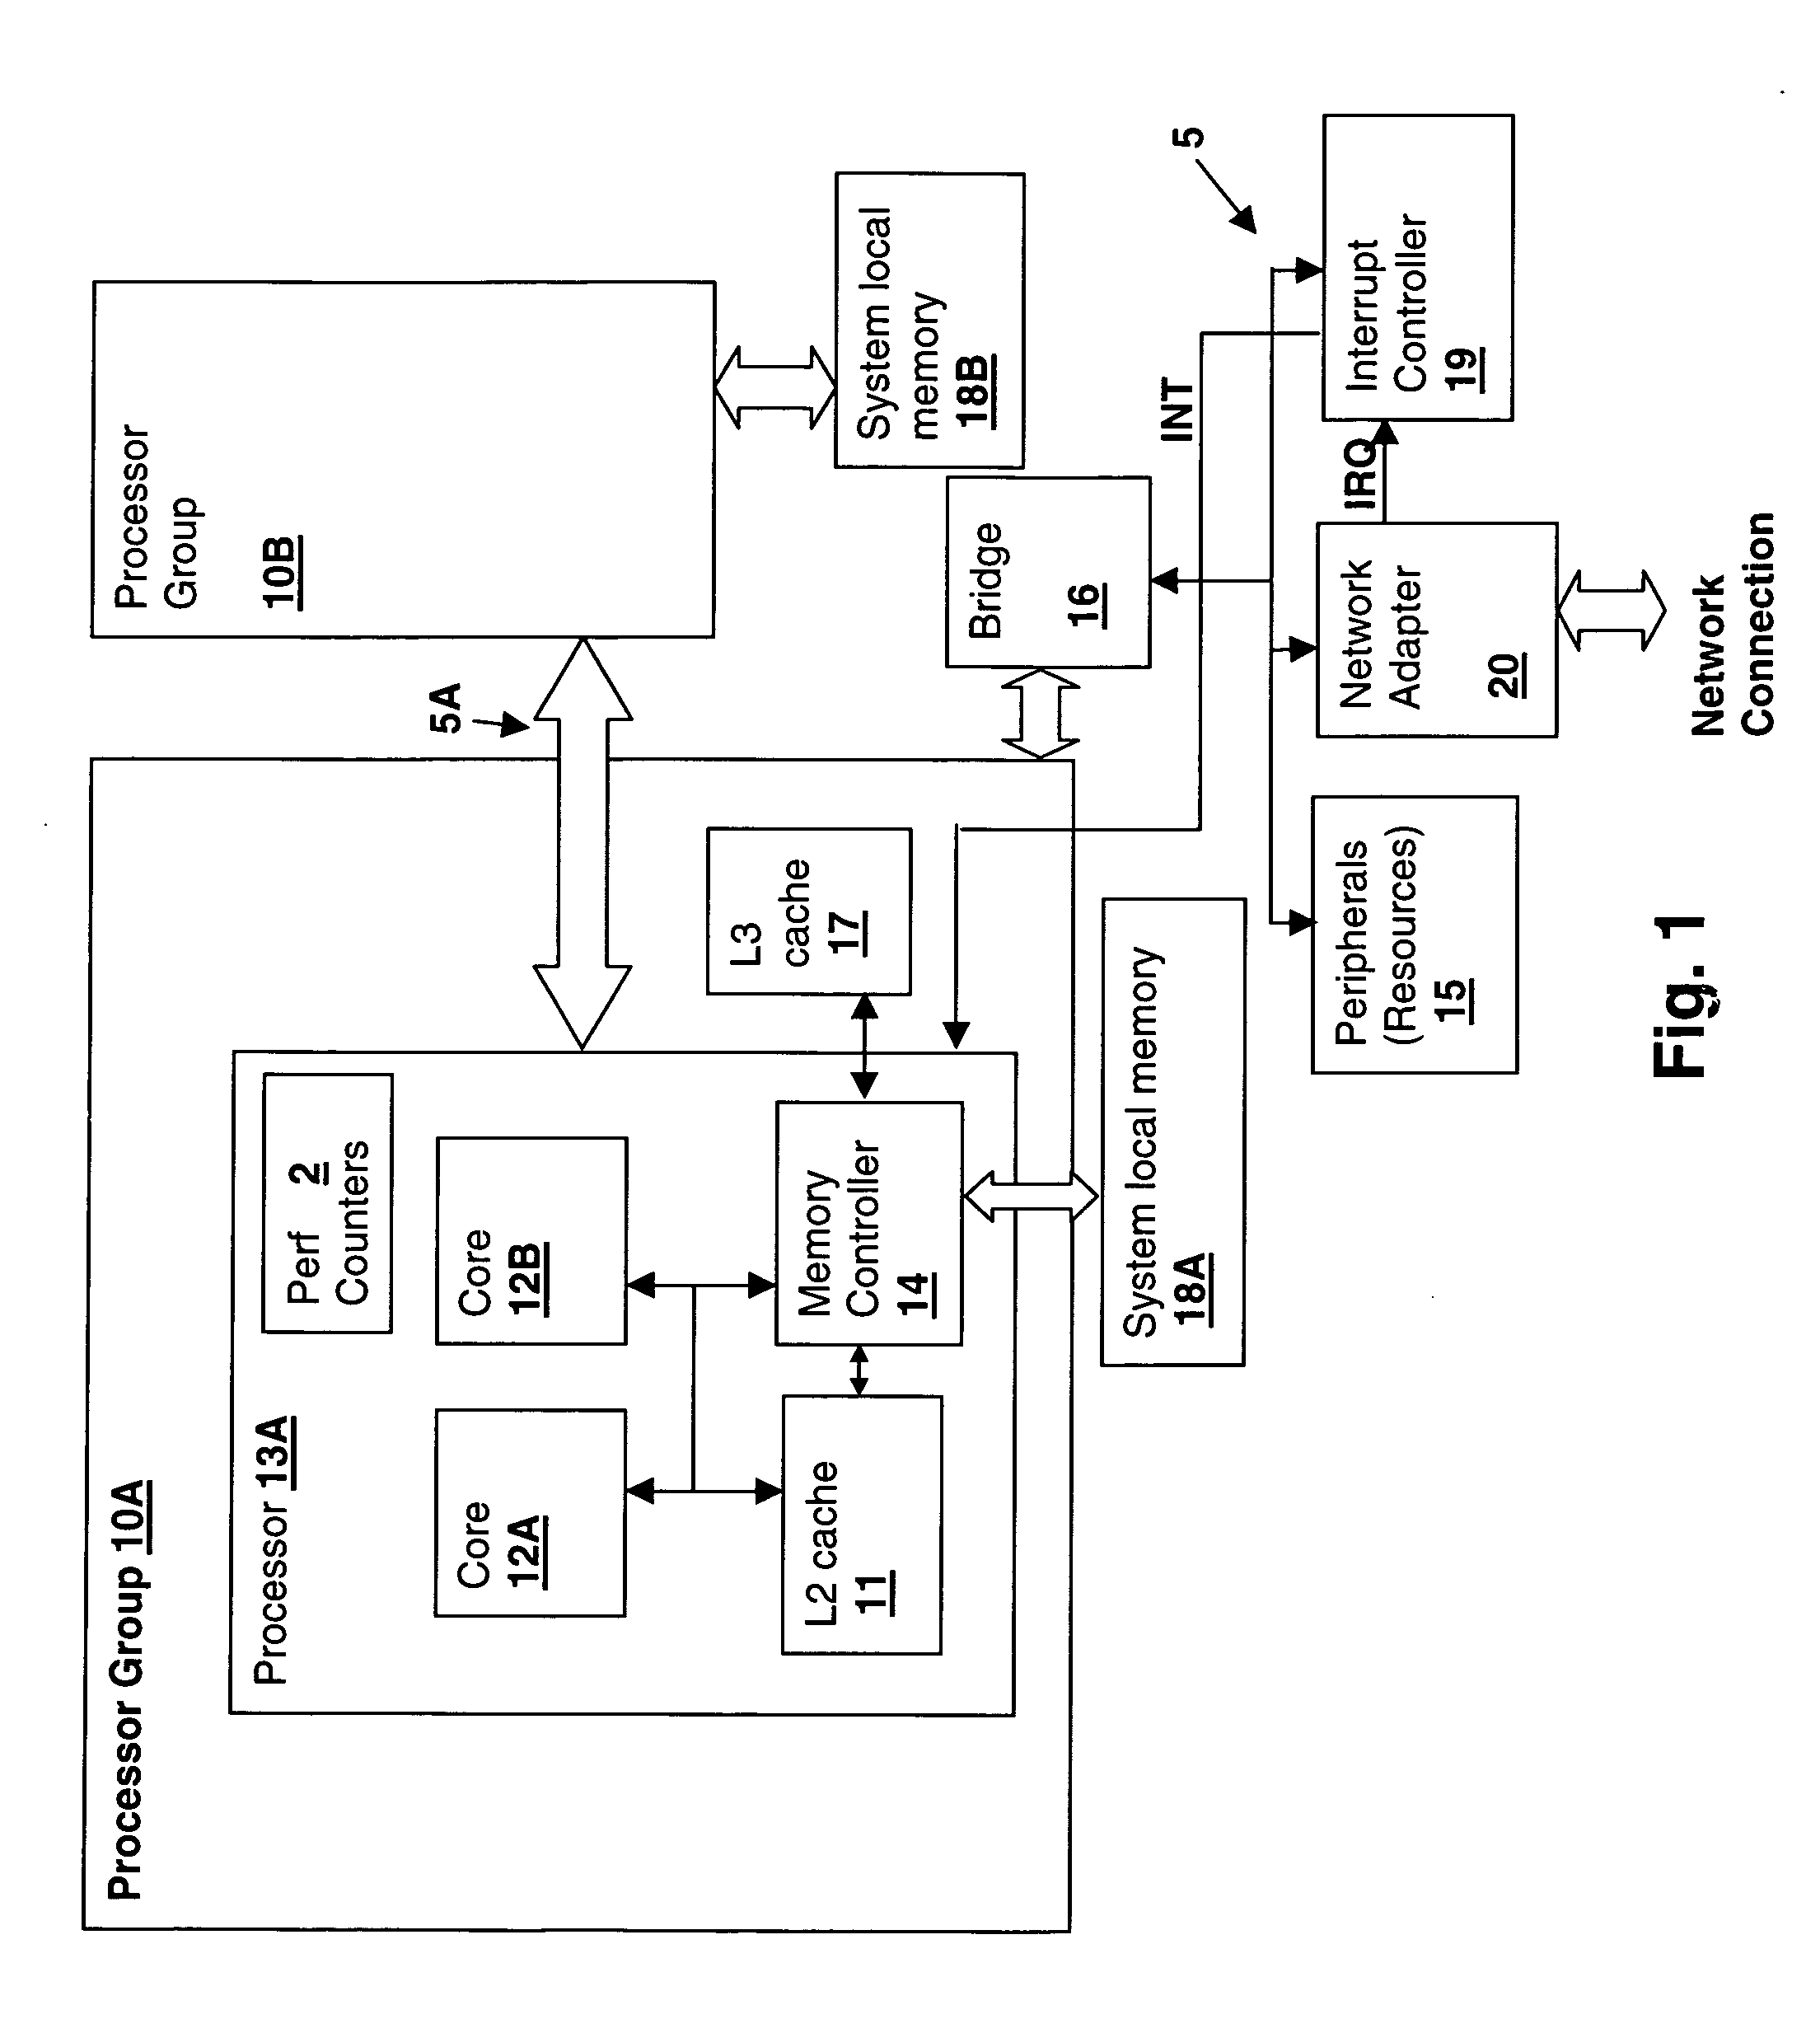 Method and apparatus for controlling peripheral adapter interrupt frequency by estimating processor load in the peripheral adapter